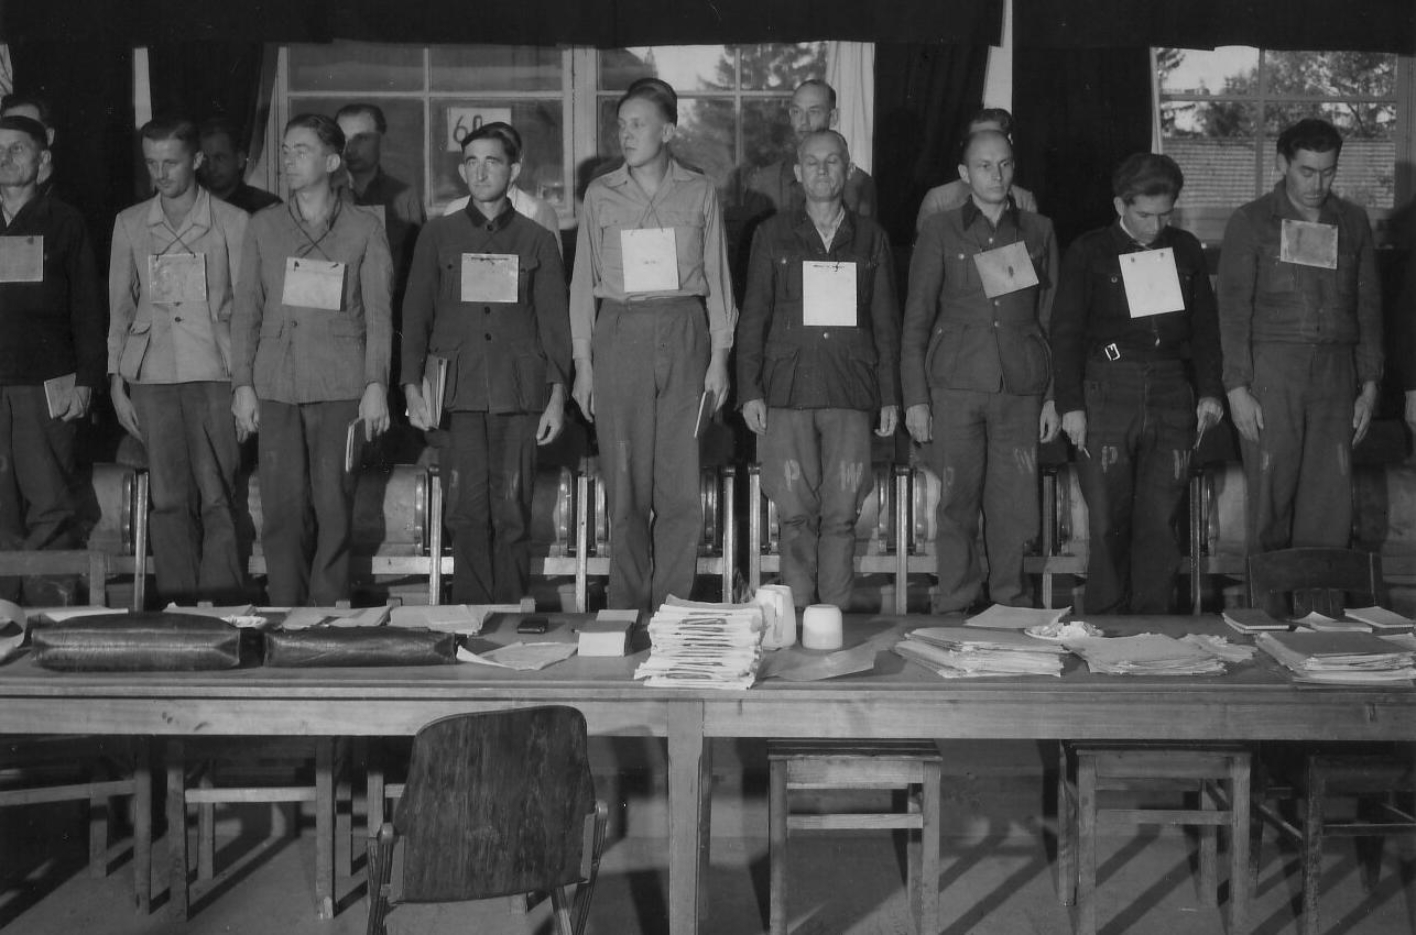 A photo of the defendants standing on their chairs. They all have a sign hanging around their necks with their name and charges listed.